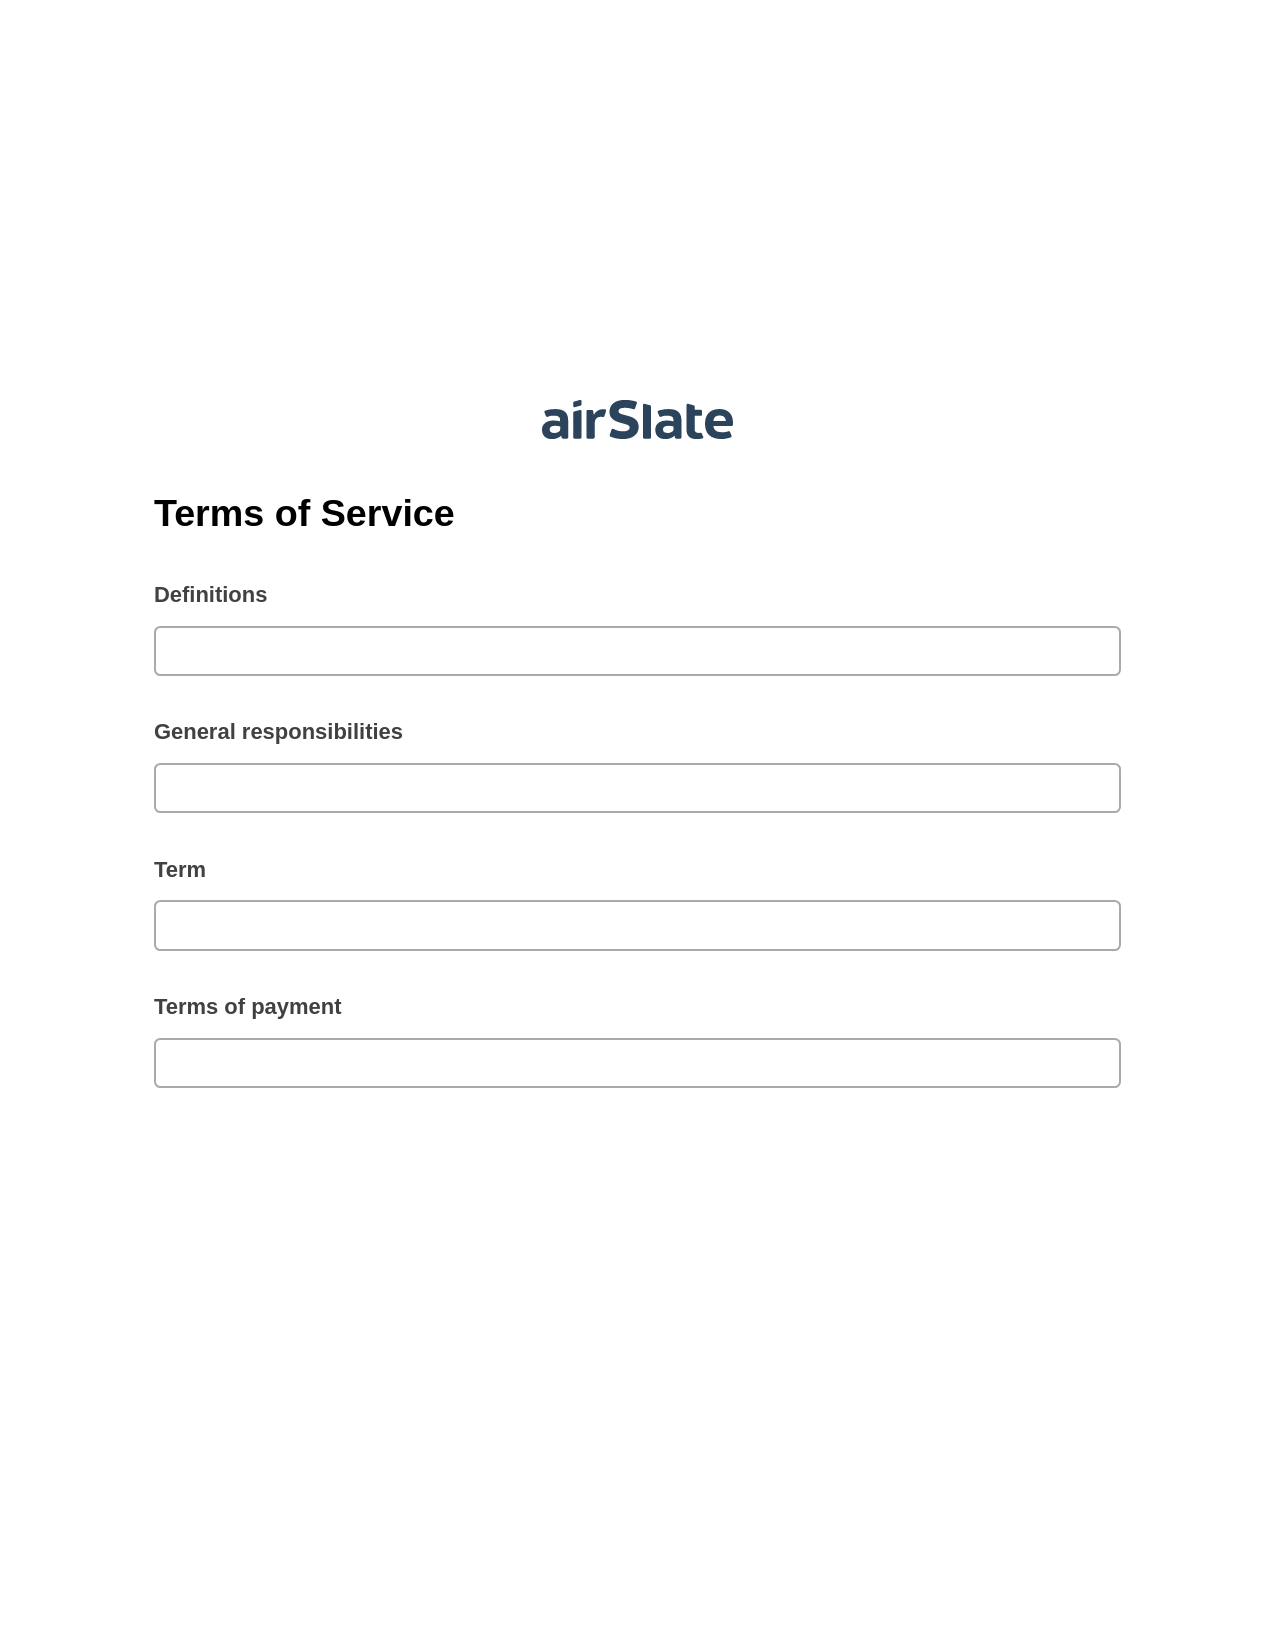 Multirole Terms of Service Pre-fill Slate from MS Dynamics 365 Records Bot, Remove Slate Bot, Export to Smartsheet